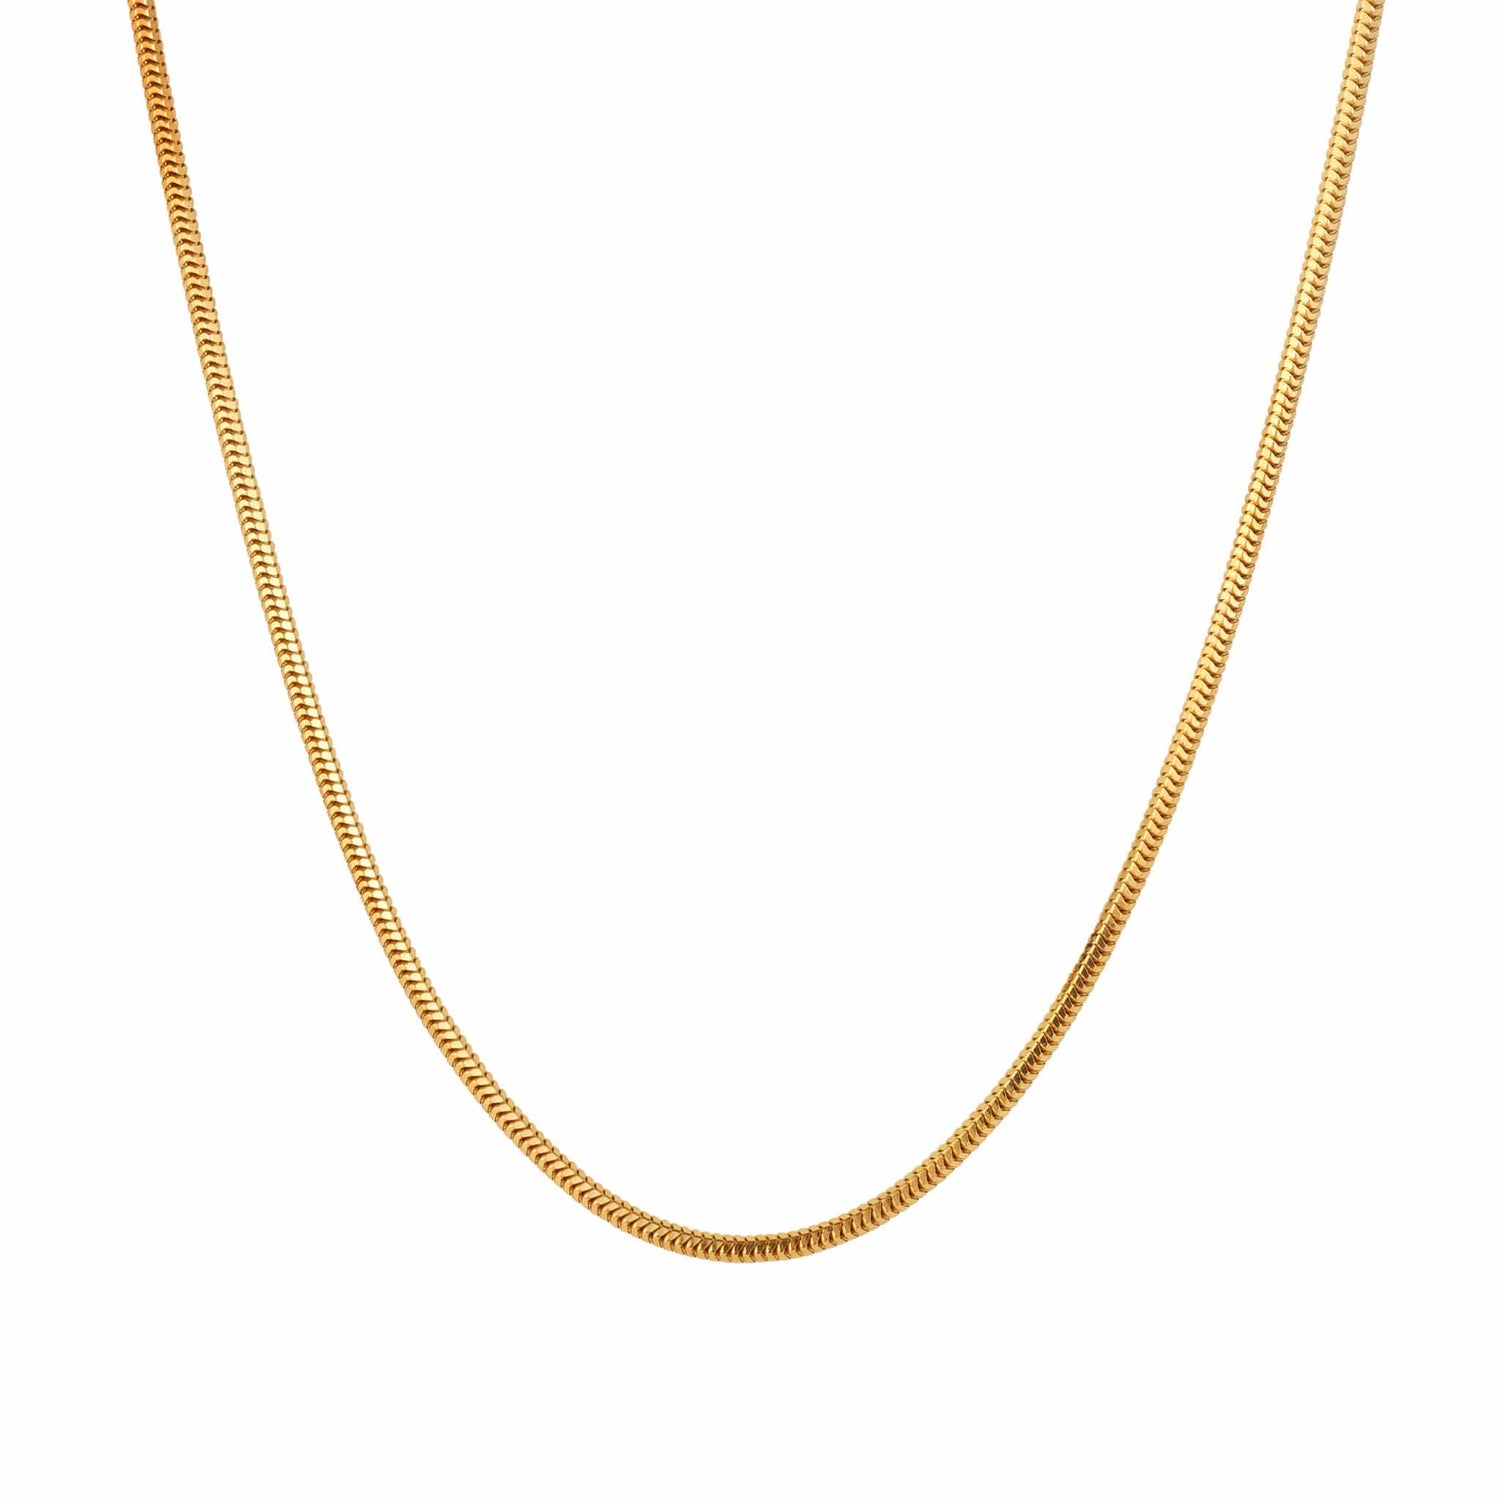 A gold snake chain necklace displayed against a white background.